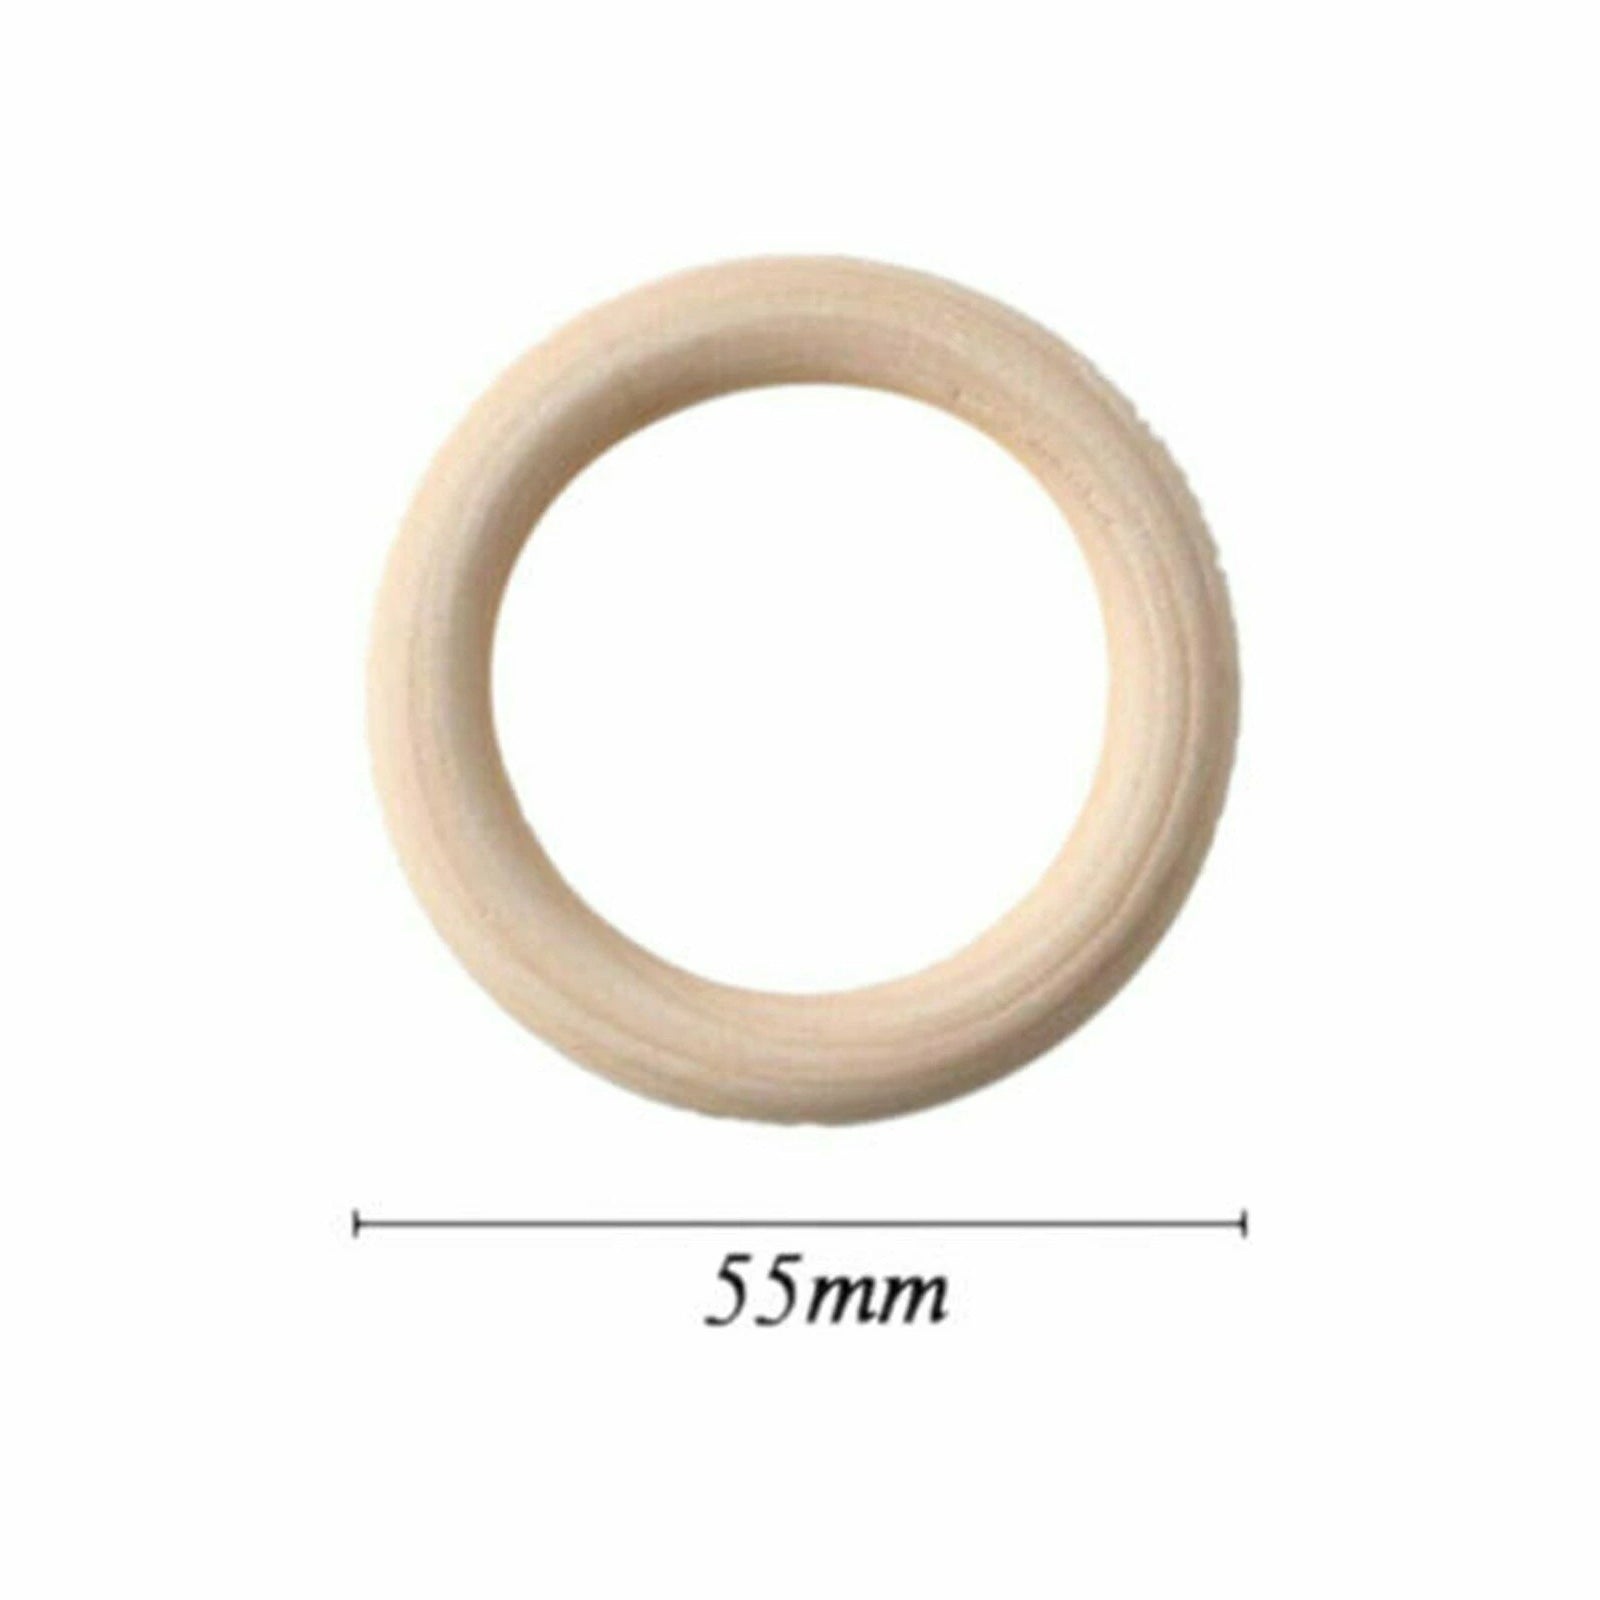 20X Baby Newborn Natural Round Wood Teething Ring Wooden Teether Toy DIY Gift AU 